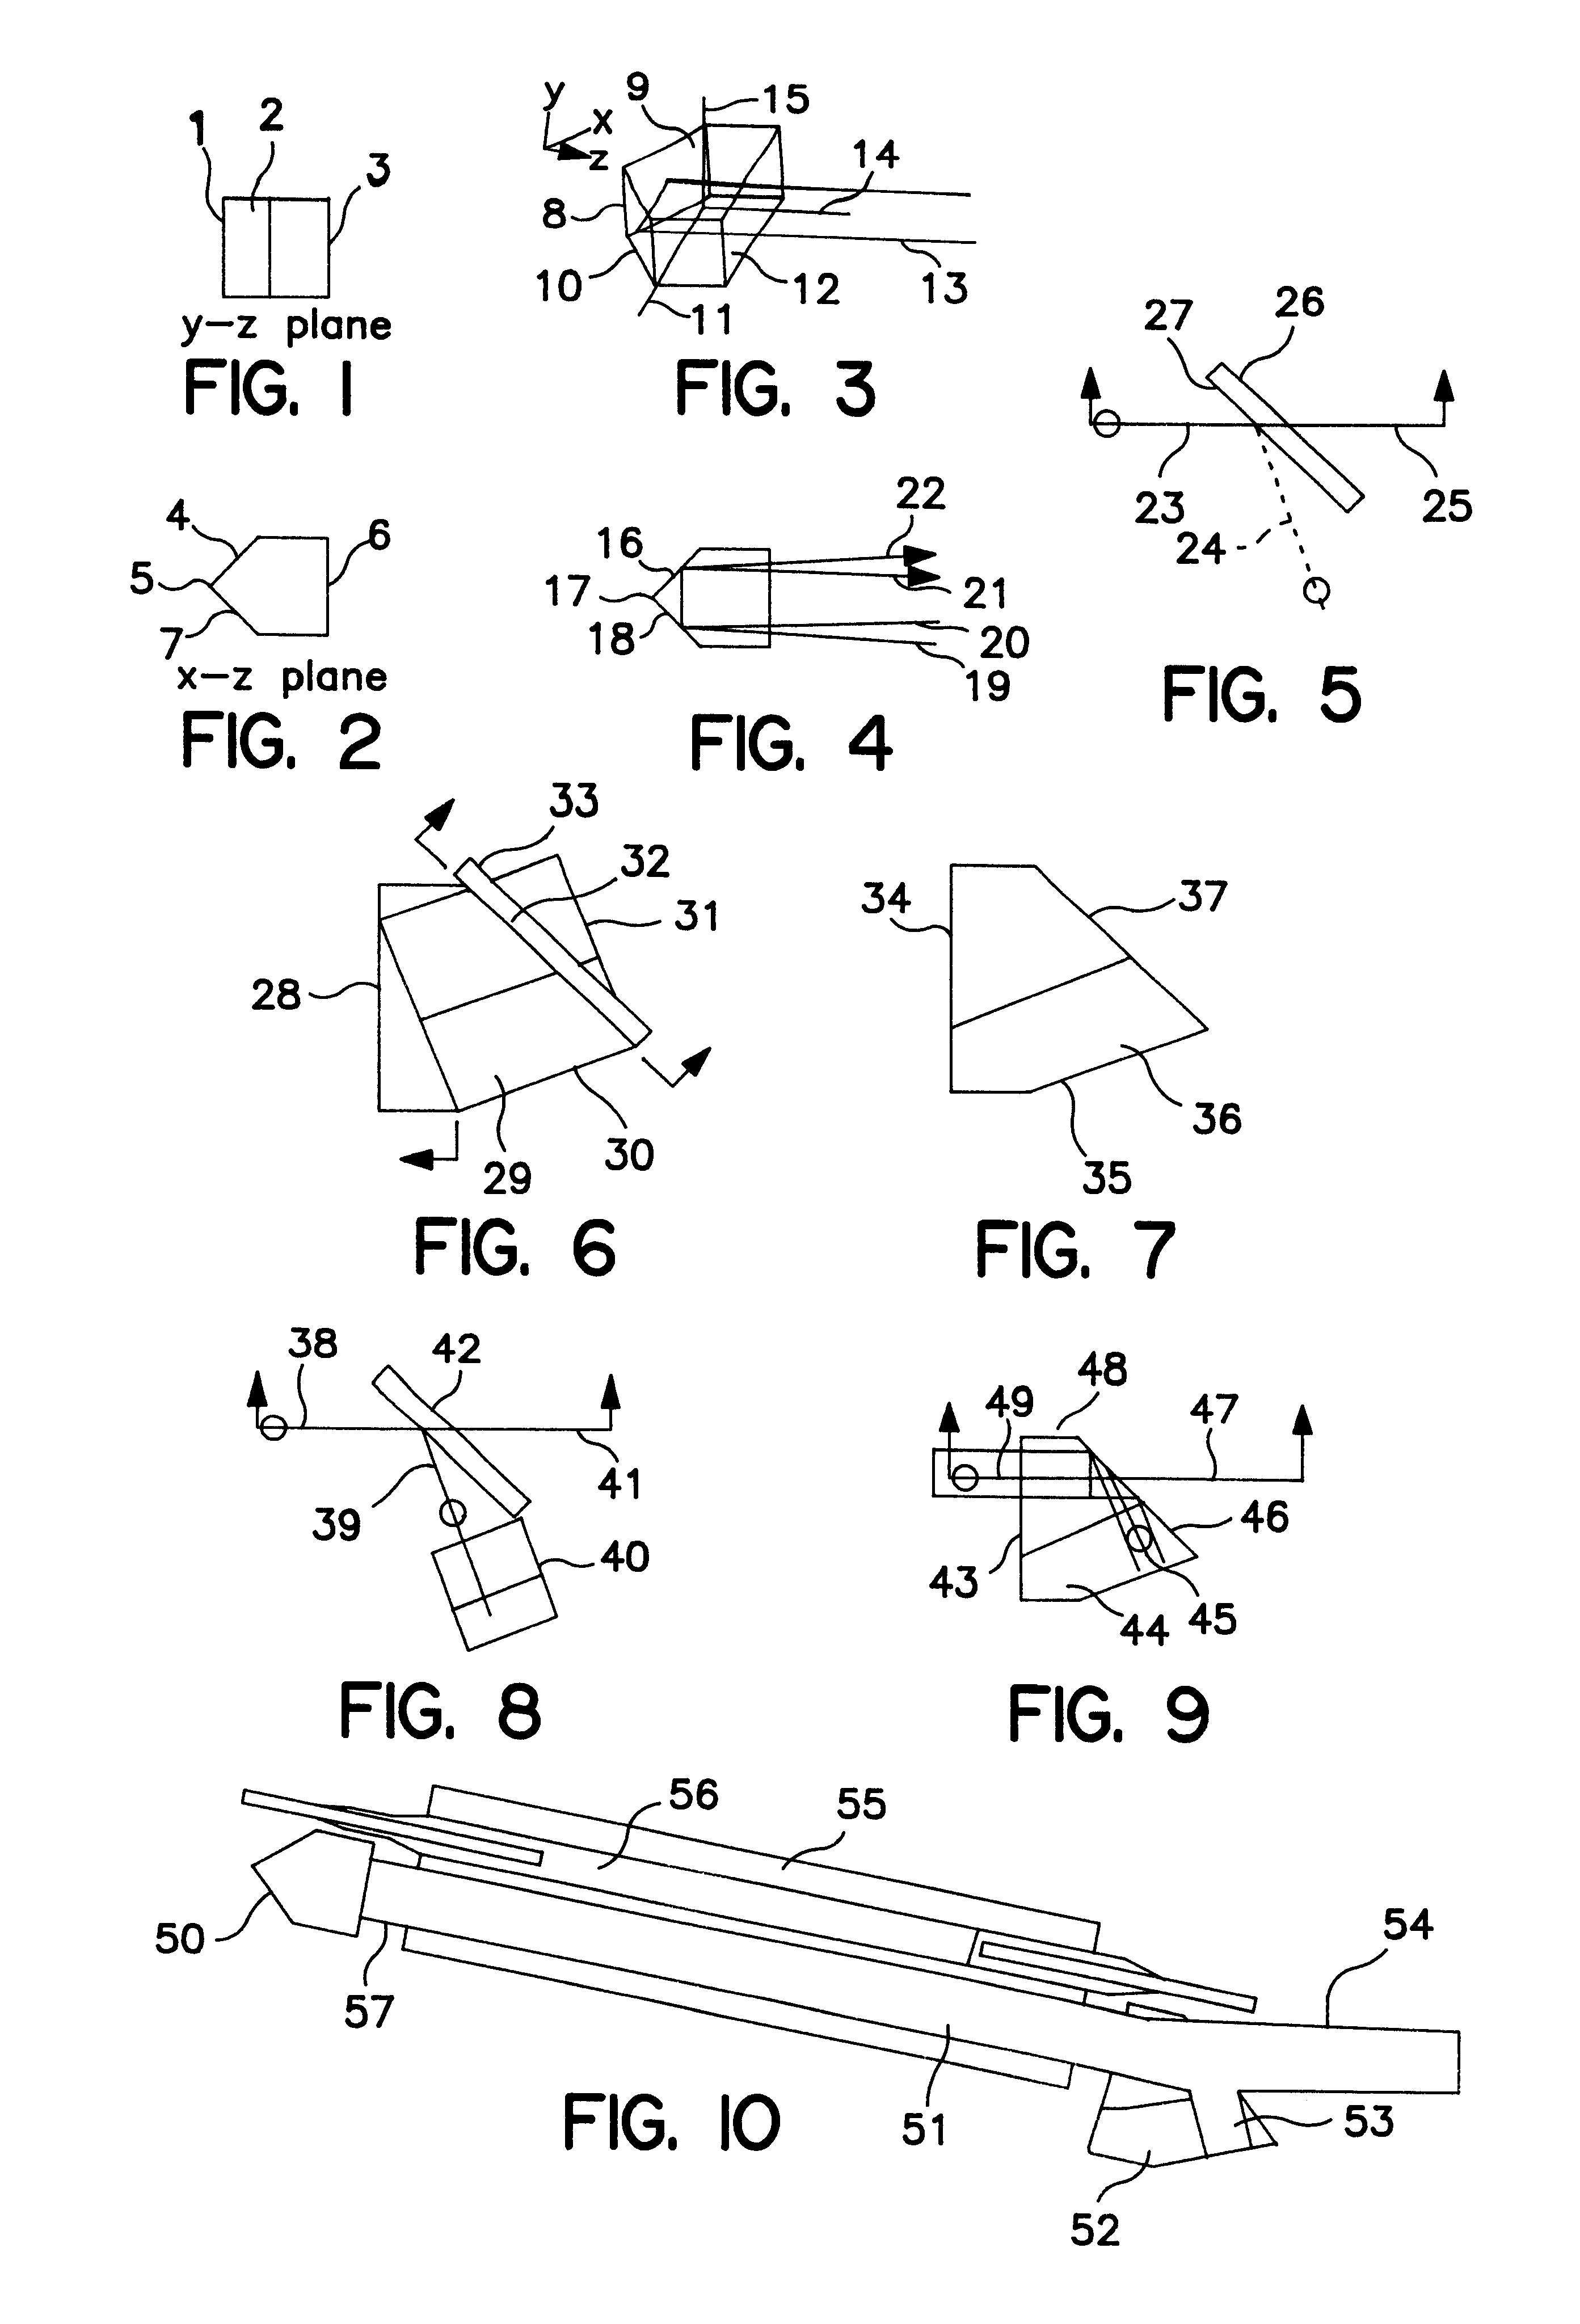 Polarization selecting optical element using a porro prism incorporating a thin film polarizer in a single element